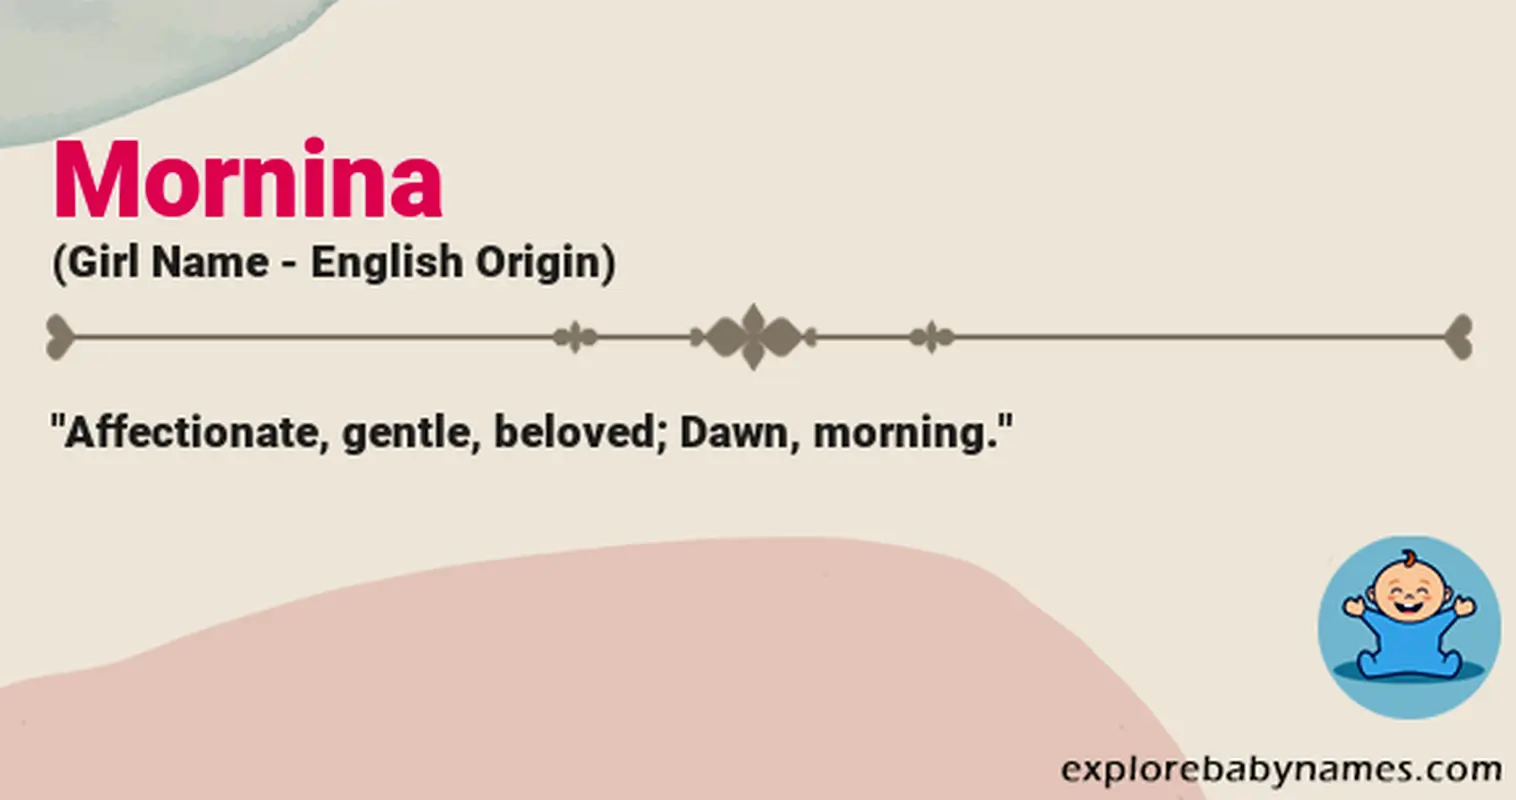 Meaning of Mornina